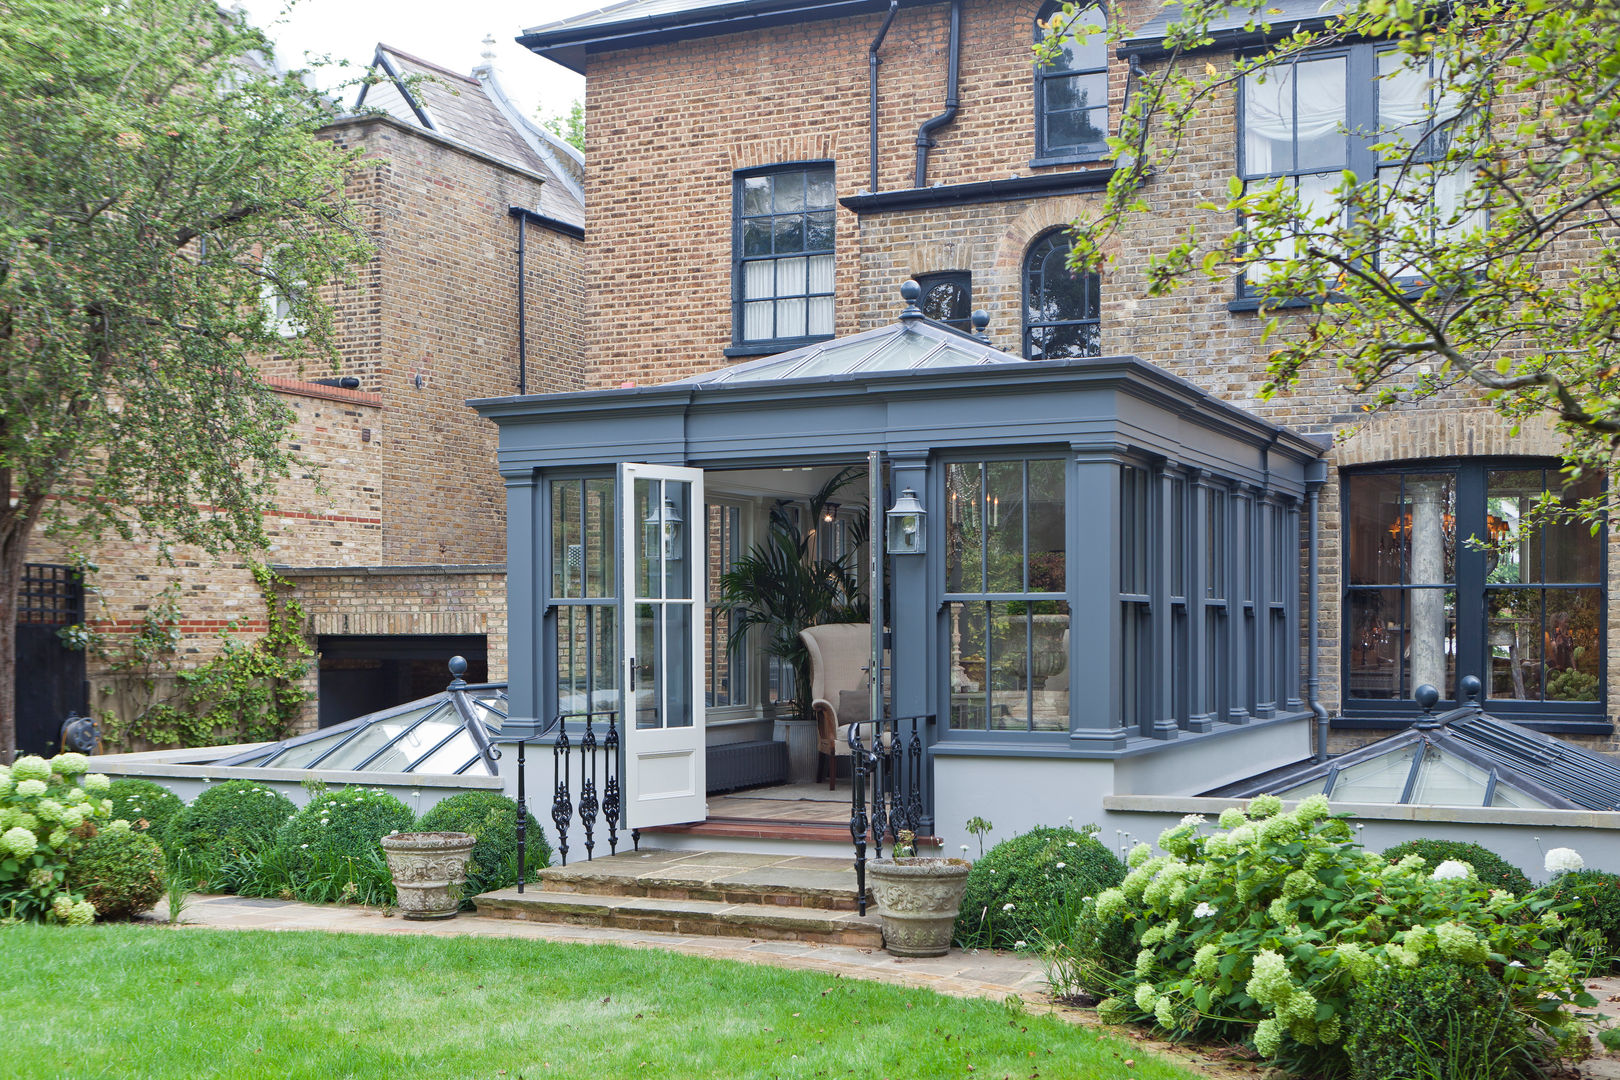 Dual Level Orangery and Rooflights Transform a London Townhouse Vale Garden Houses 에클레틱 온실